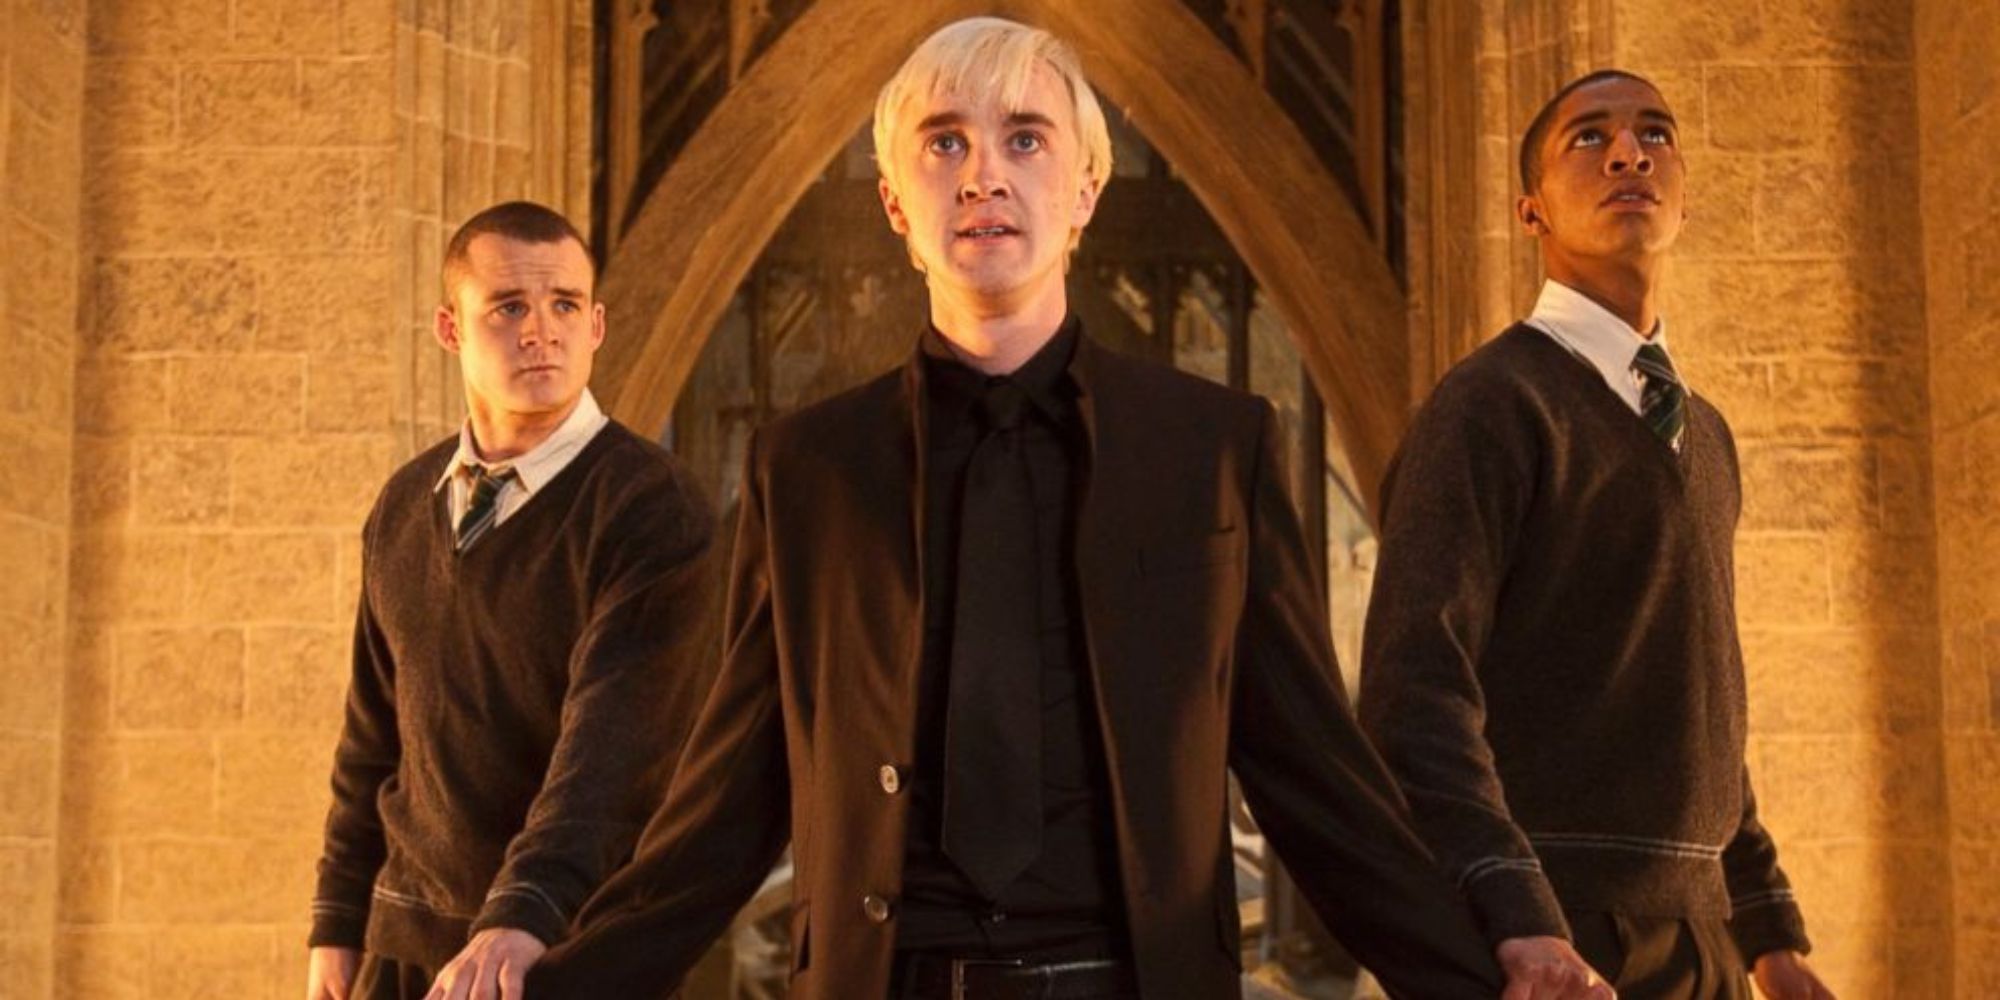 Draco Malfoy, Goyle and another Slytherin stand ready for action